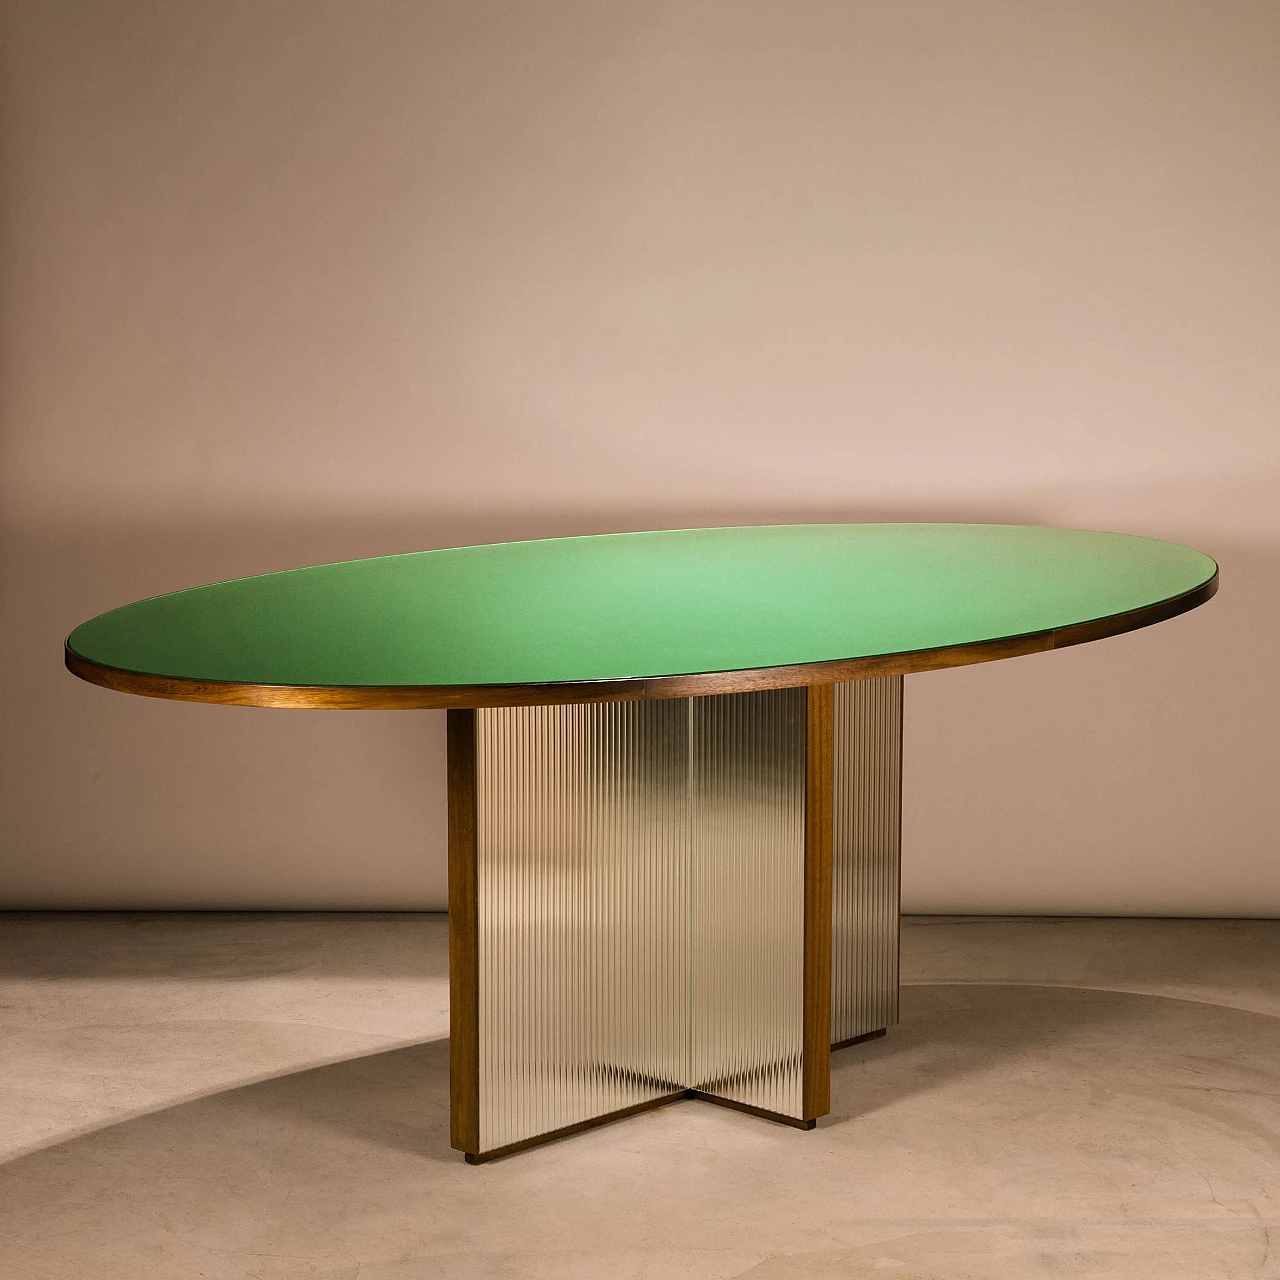 Oval wood and glass table by Artisan 1